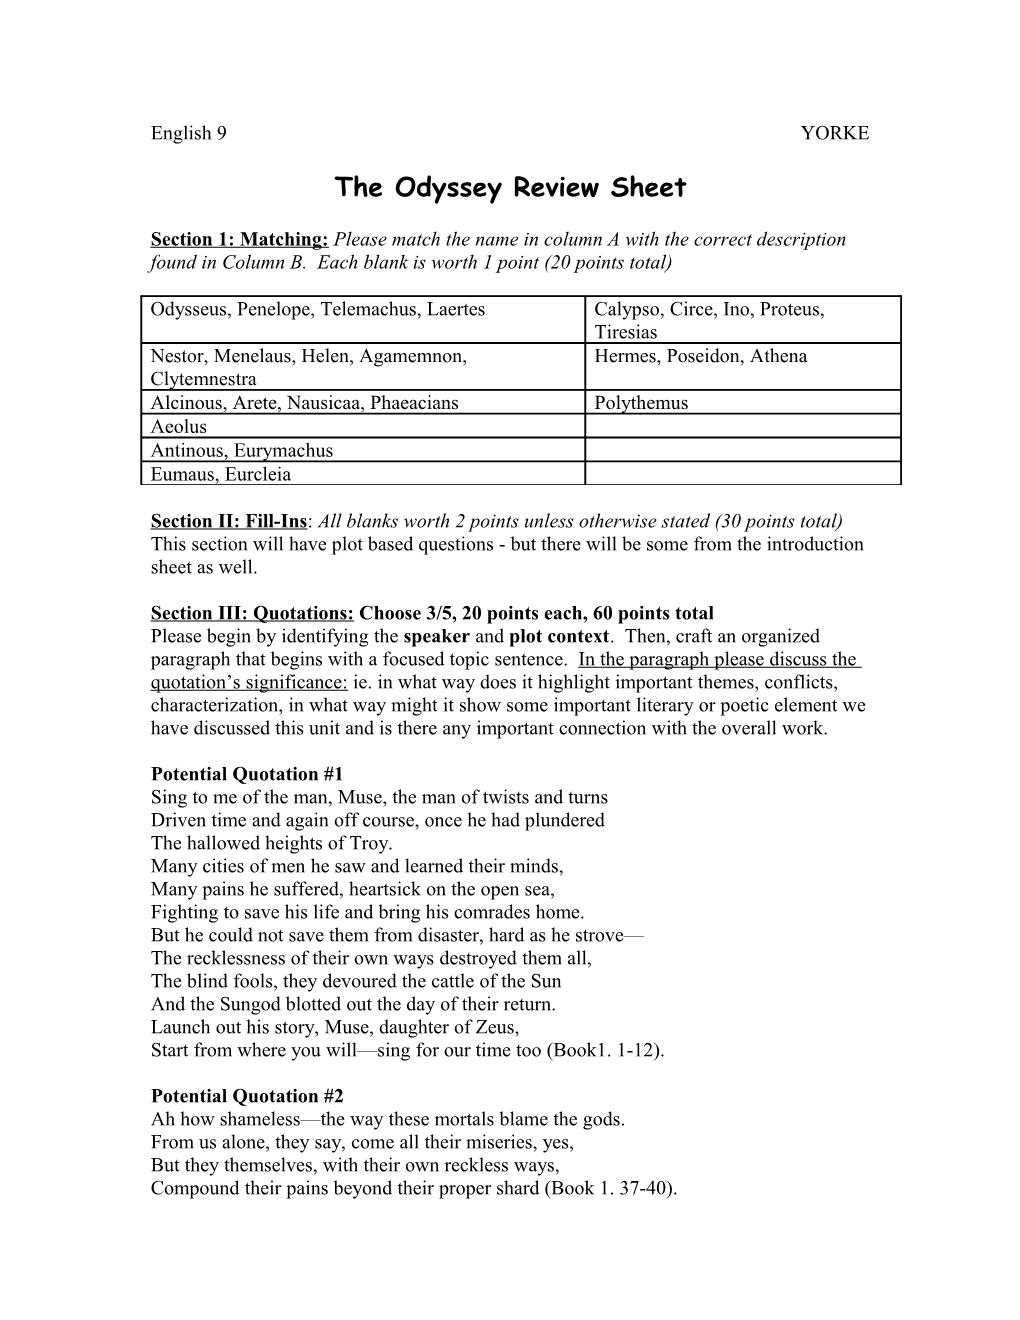 The Odyssey Review Sheet